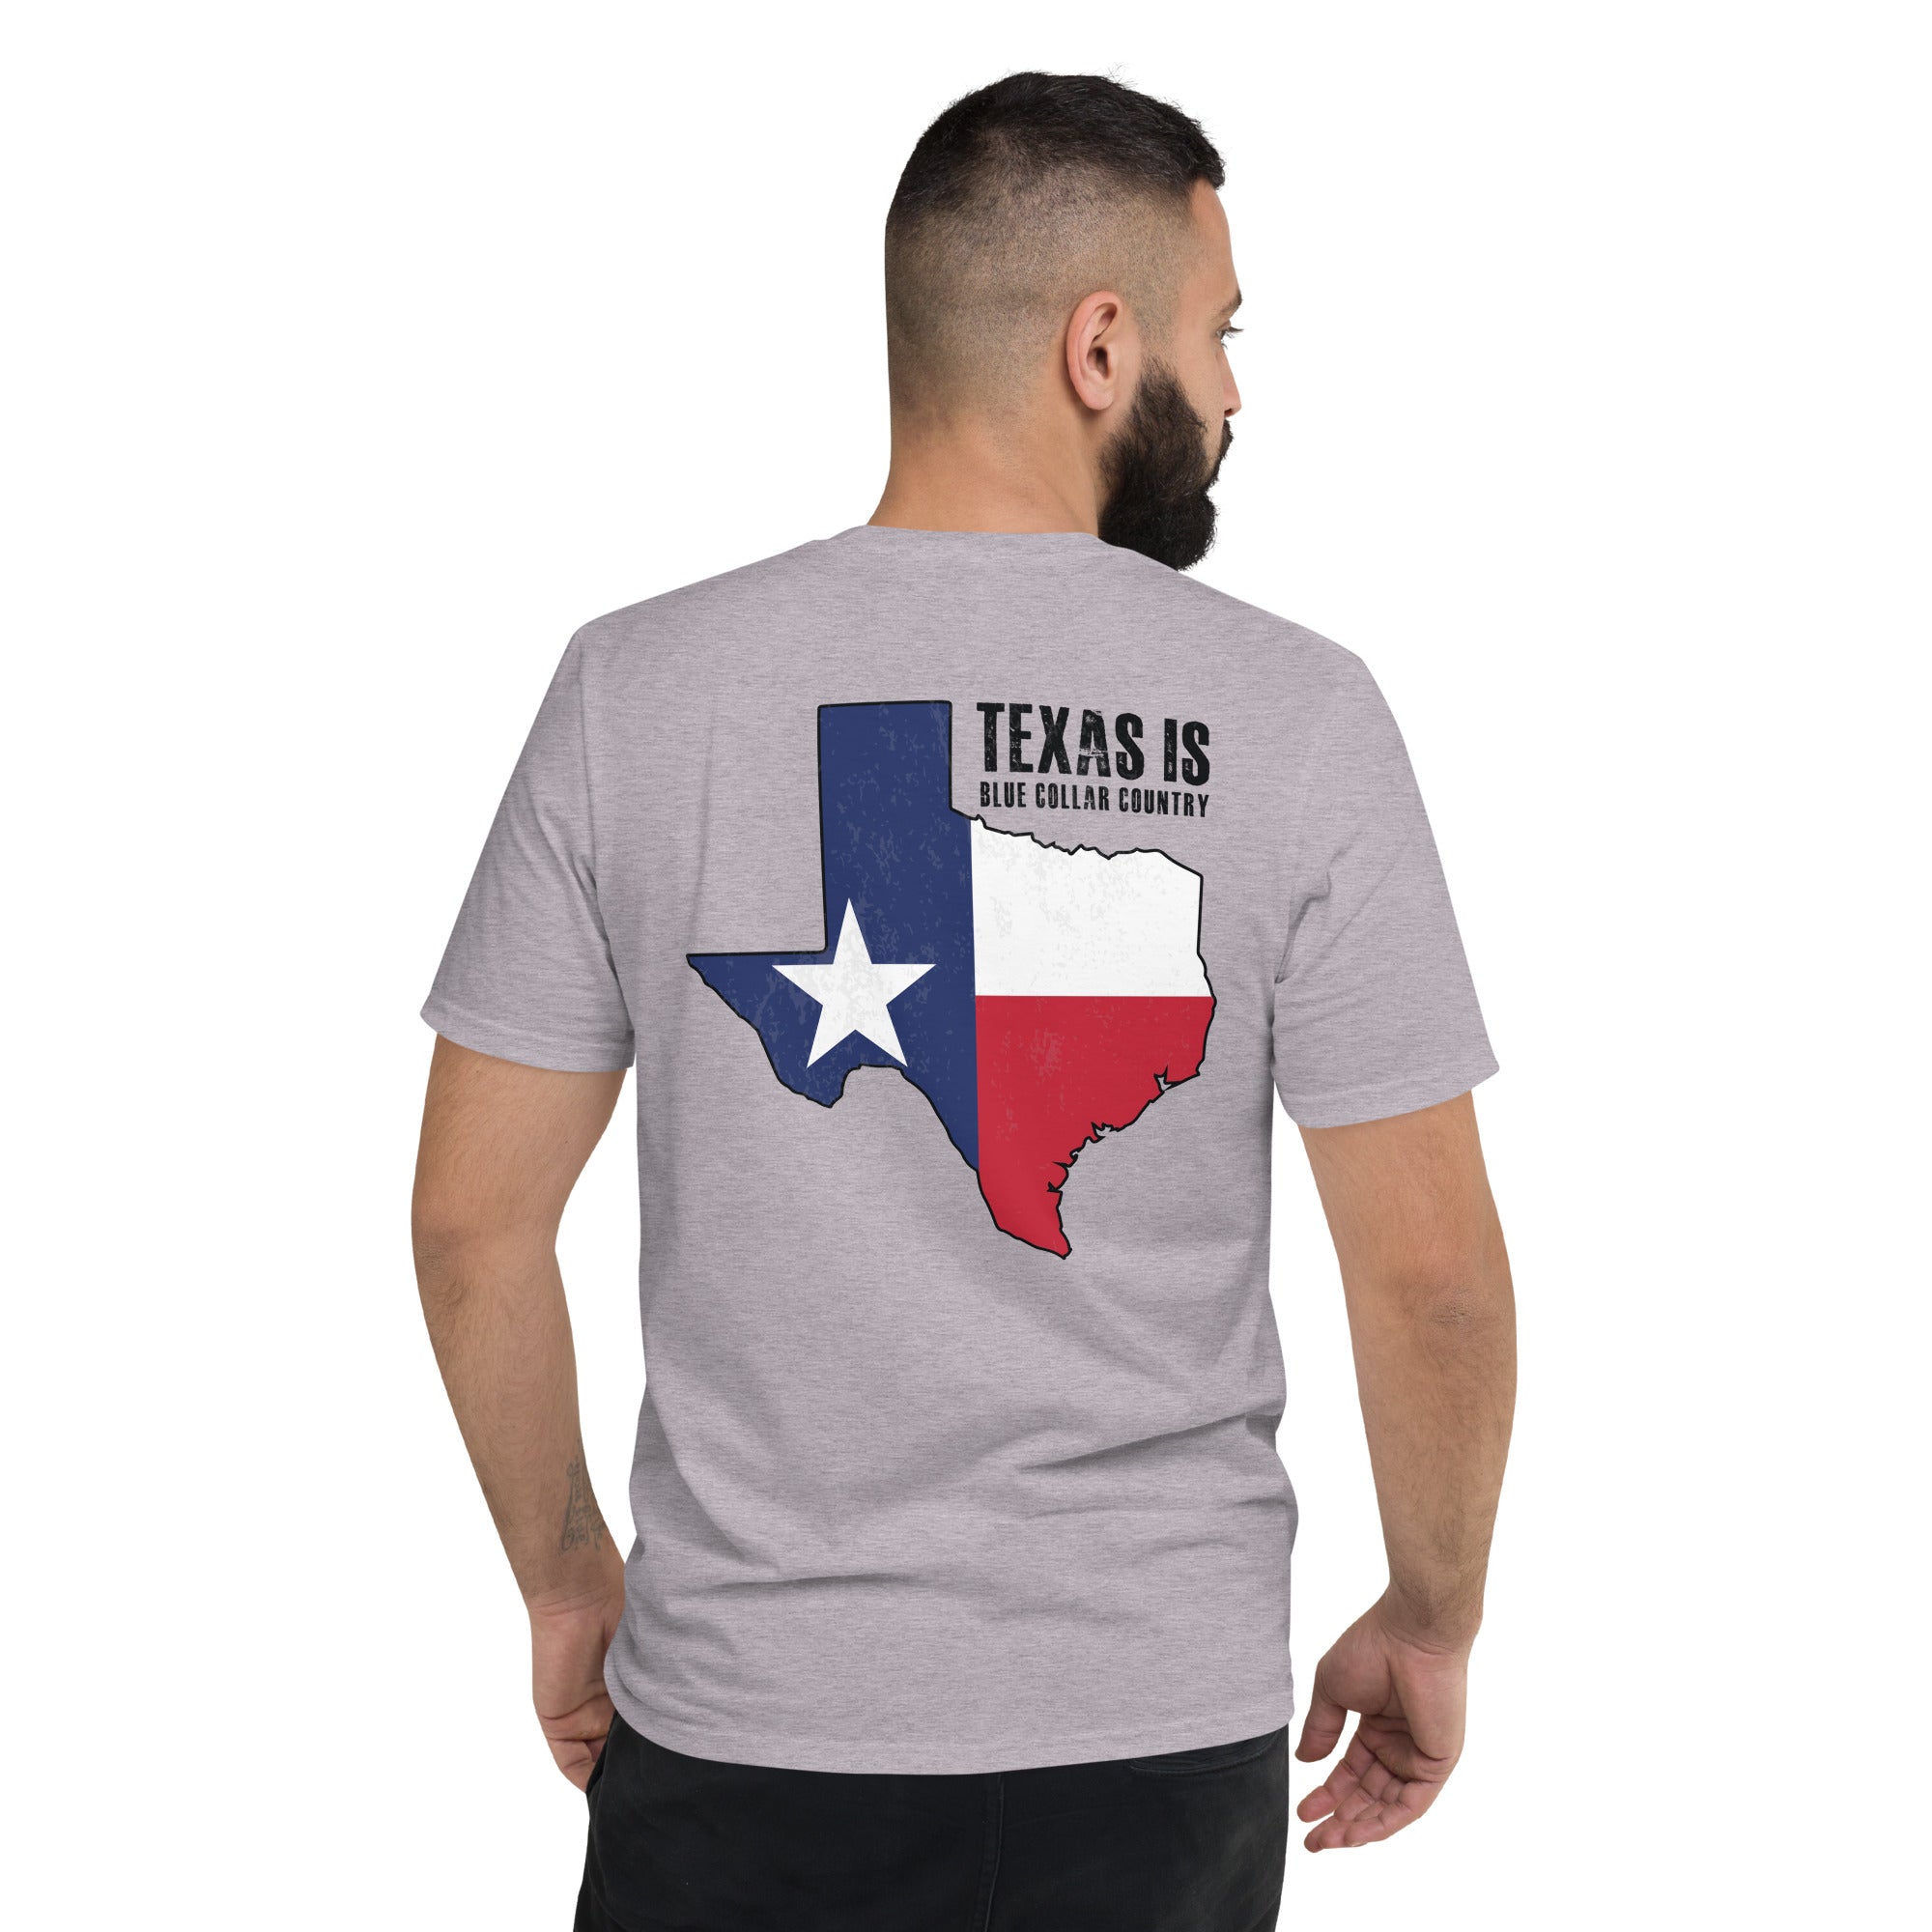 Texas is Blue Collar Country  I  Short-Sleeve T-Shirt